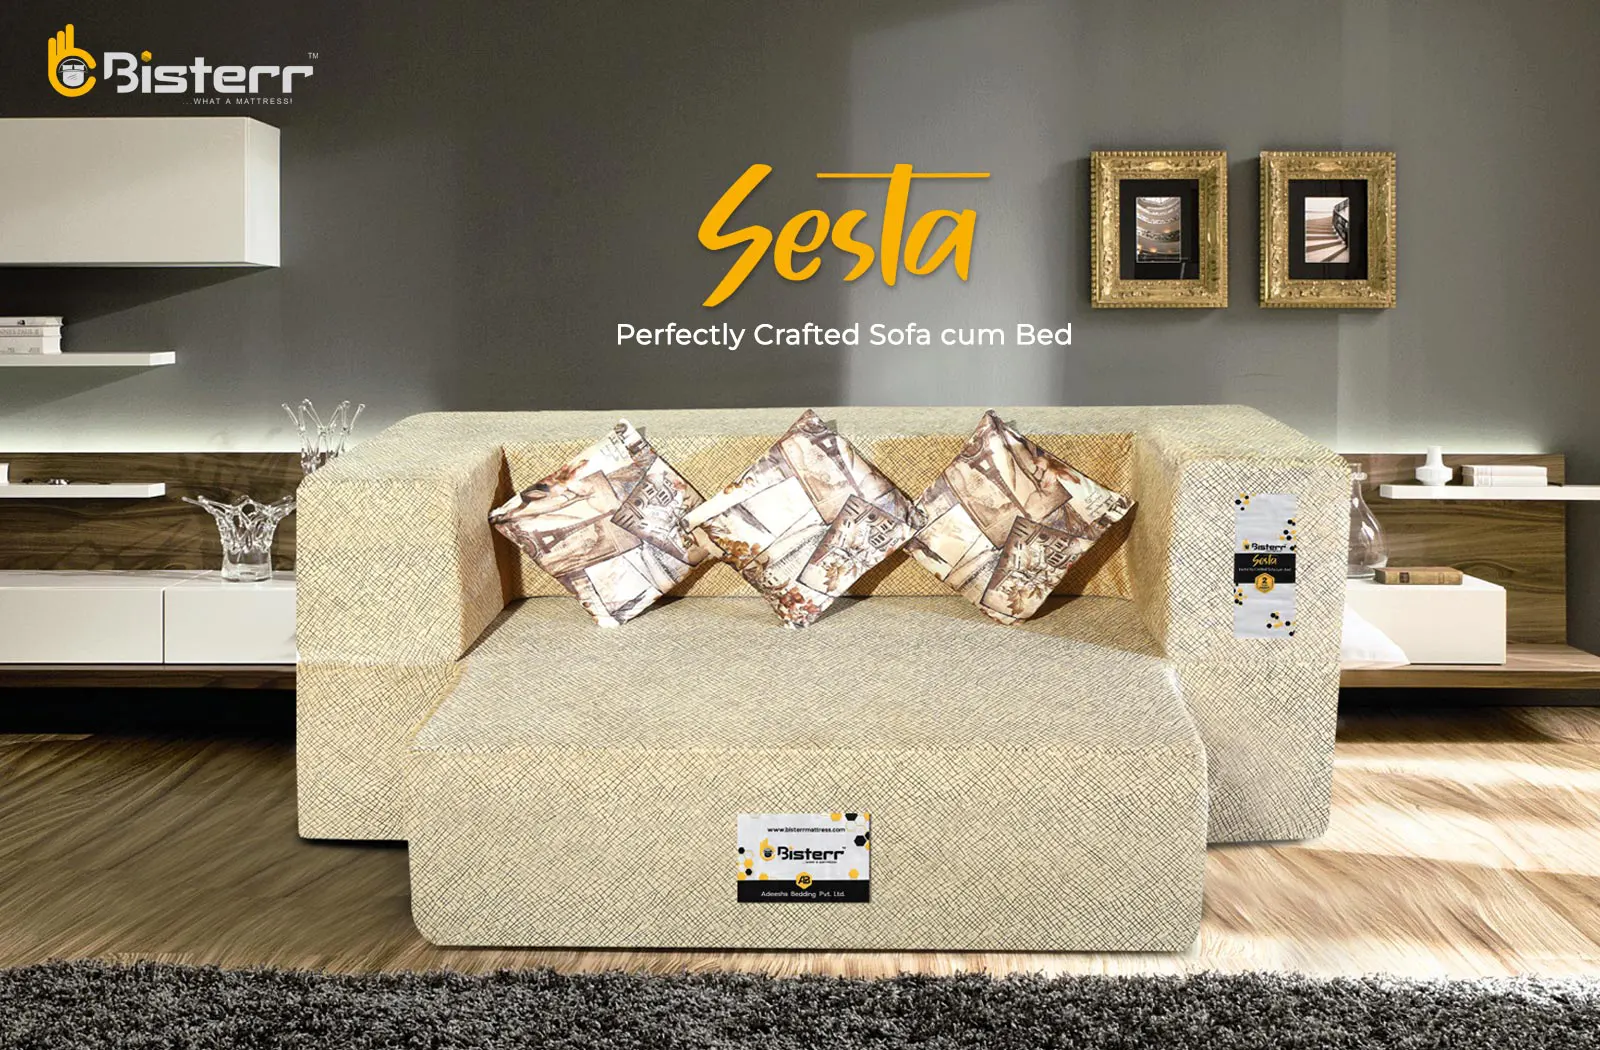 Sesta-Fashionably Crafted Sofa Cum Bed